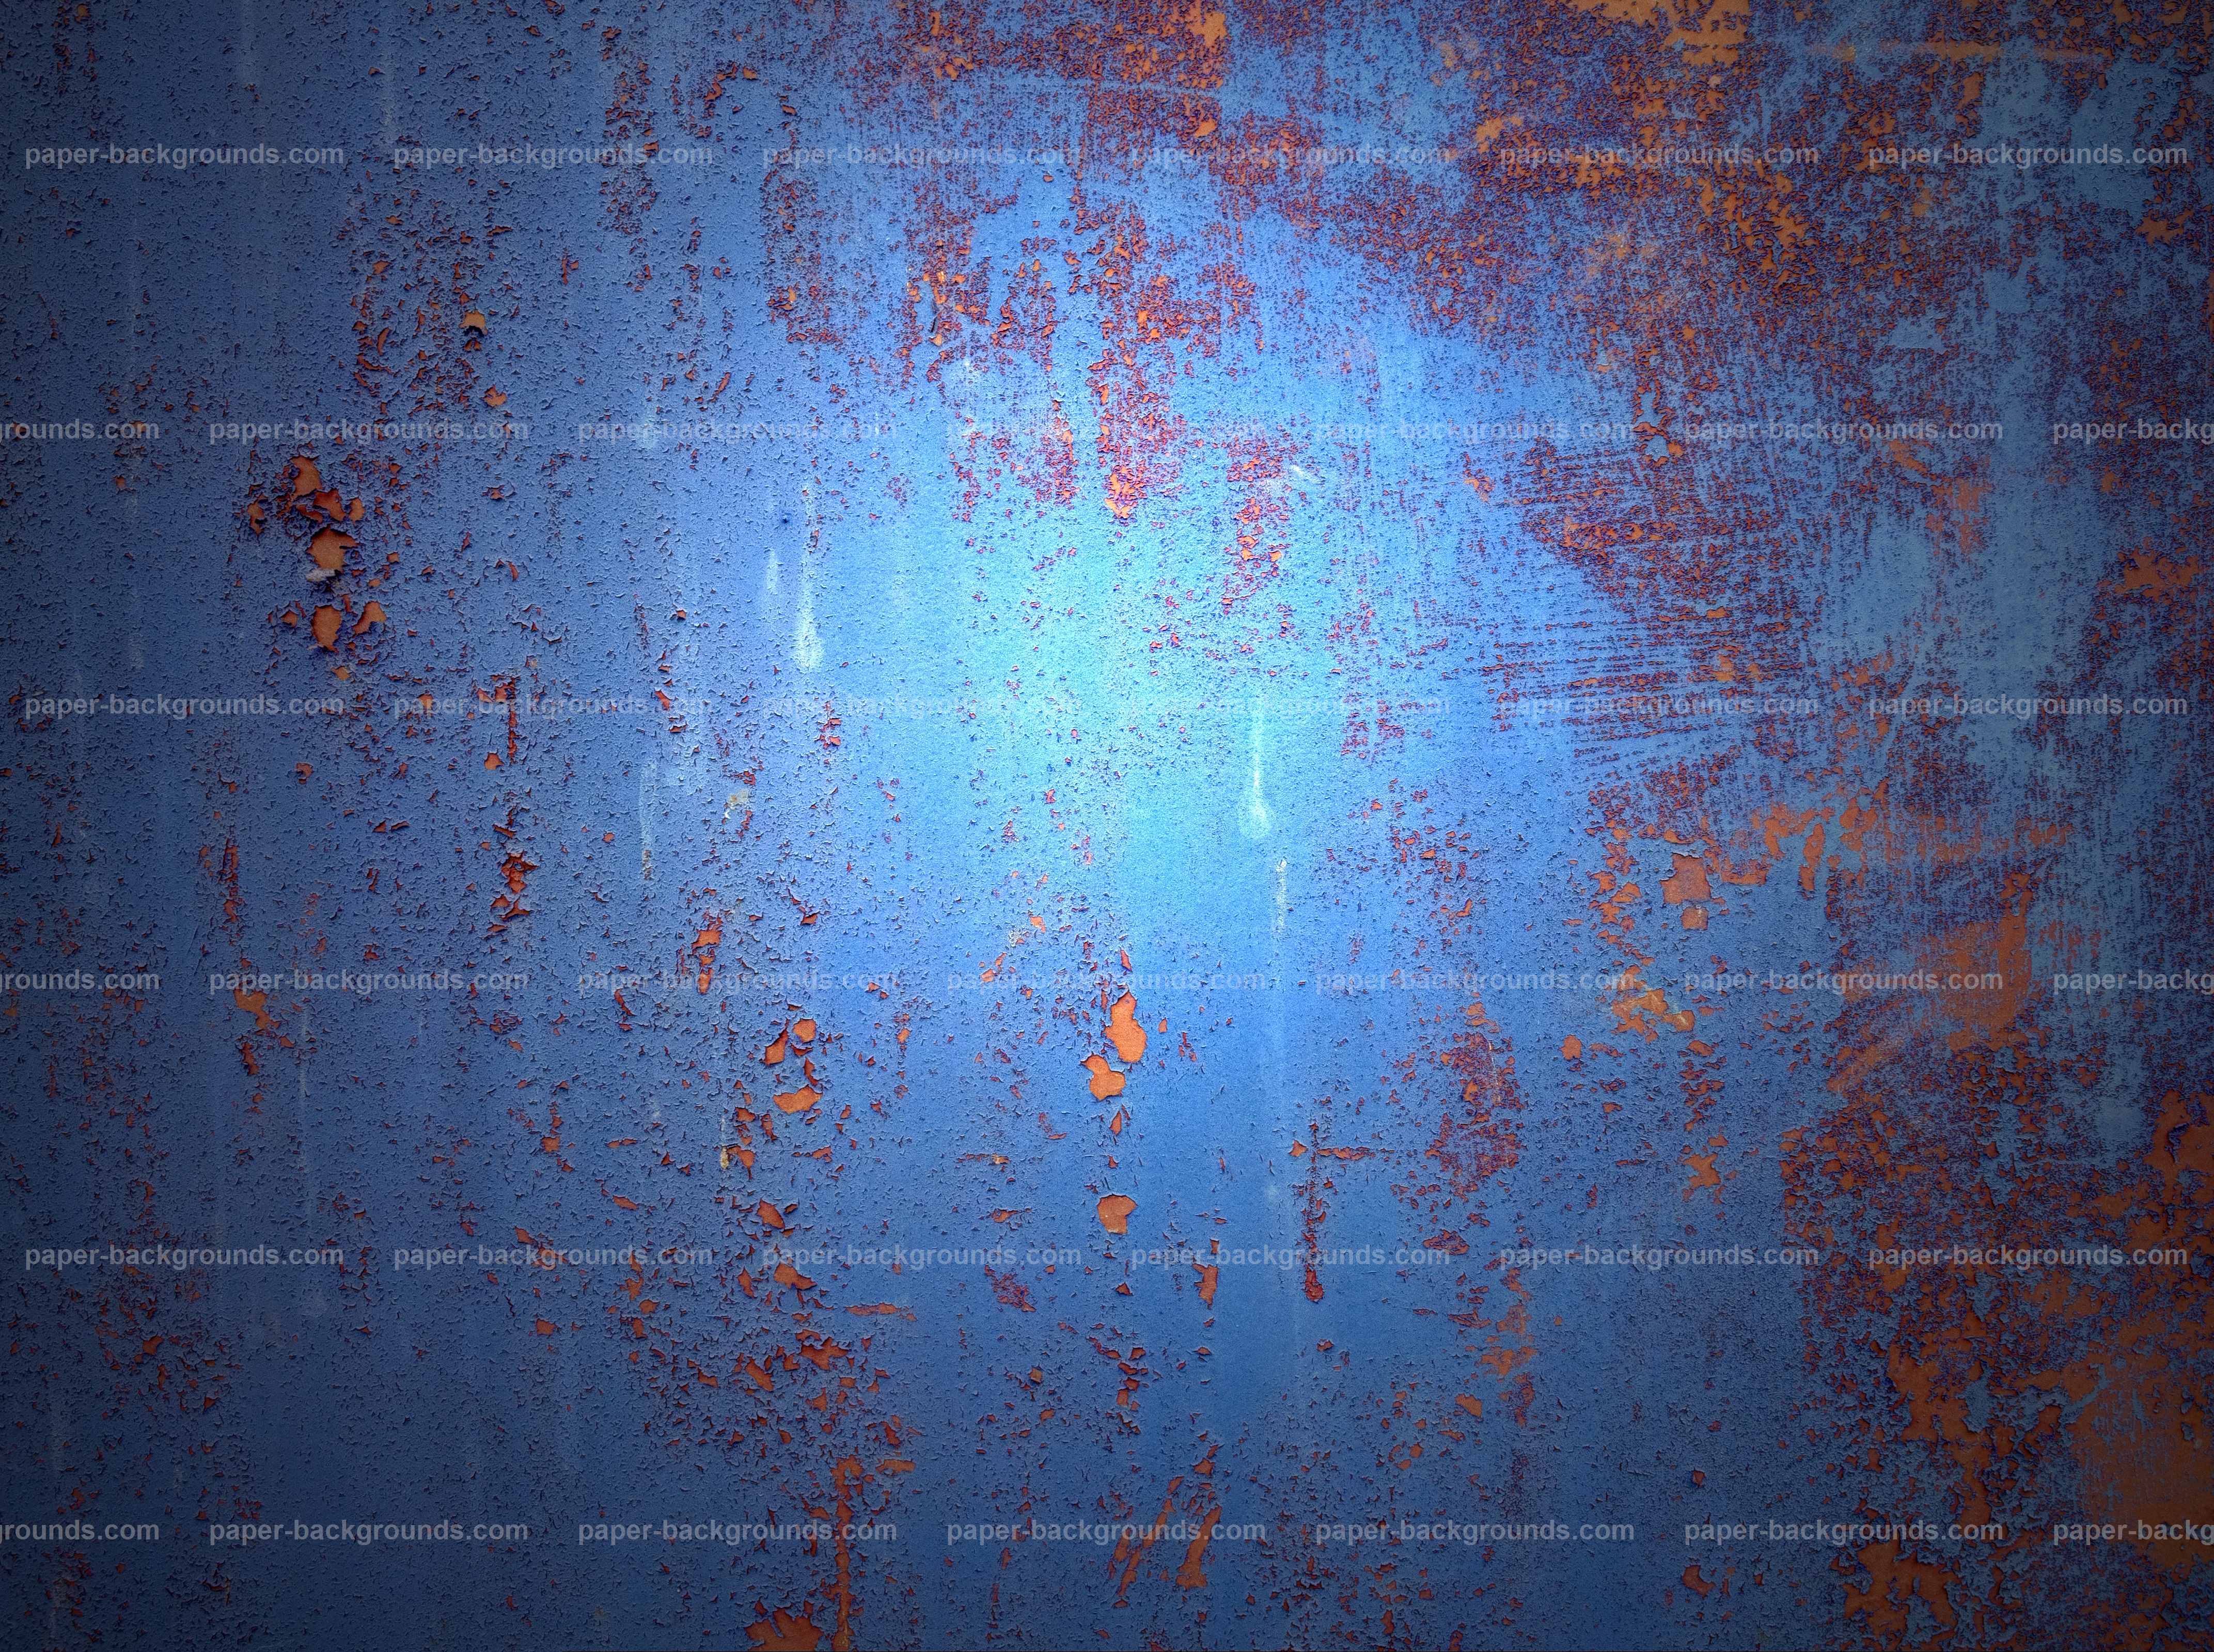 Paper Backgrounds | Grunge Rusty Blue Metal Background